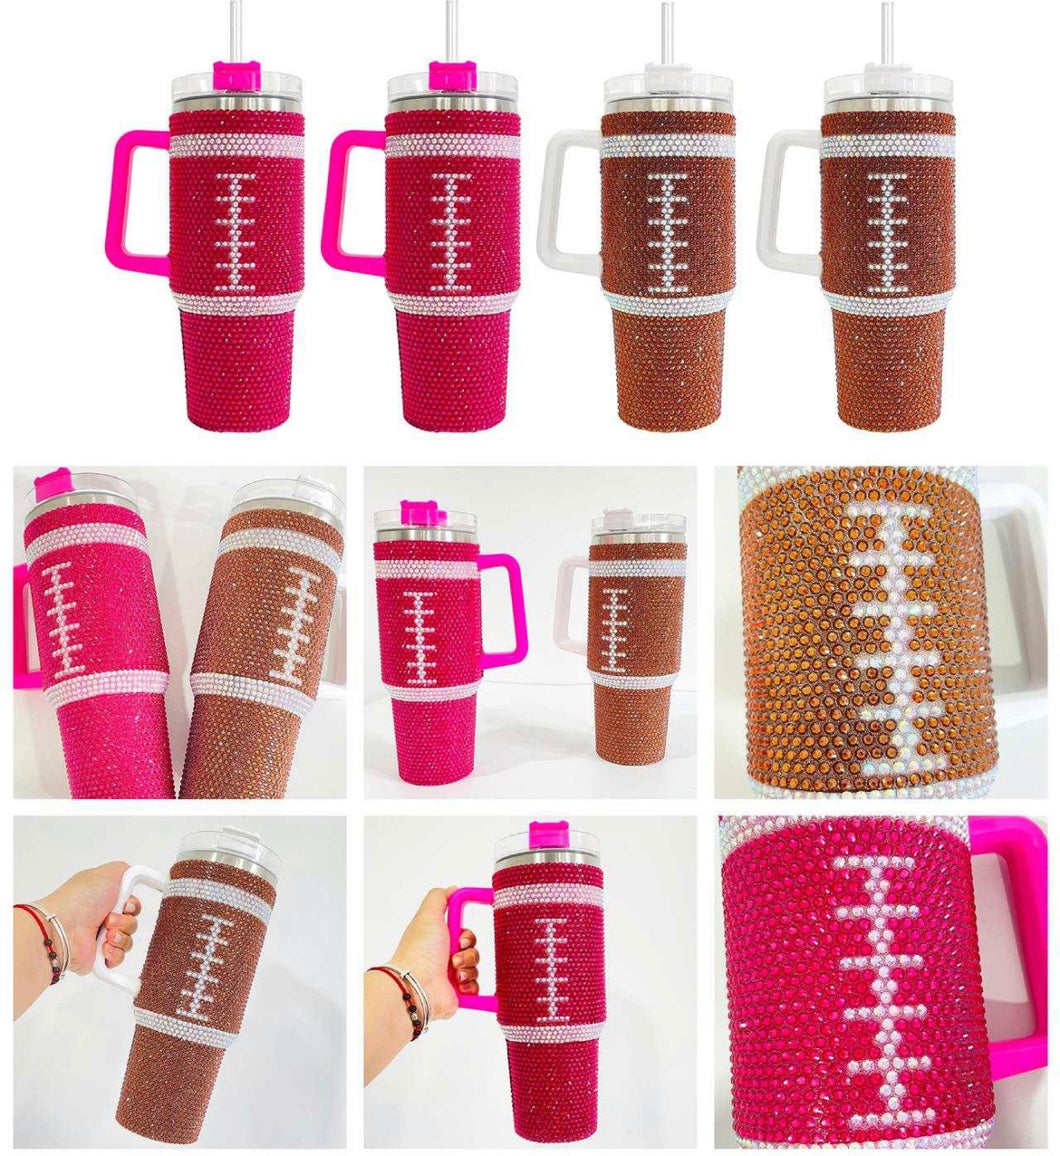 Bling Cup - Football